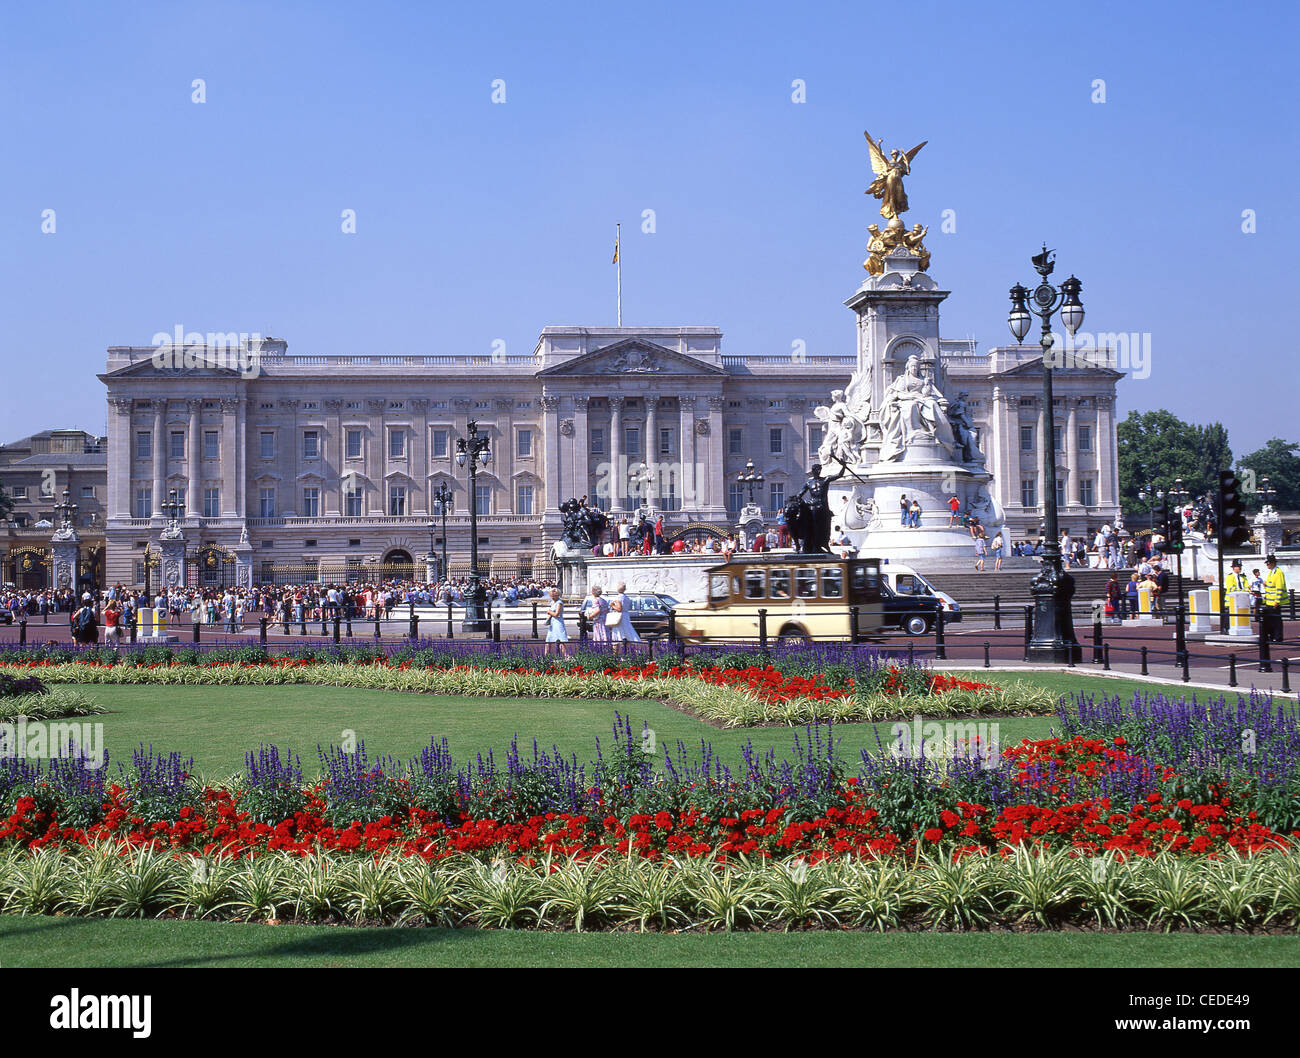 Buckingham Palace, Westminster, City of Westminster, Londra, Inghilterra, Regno Unito Foto Stock